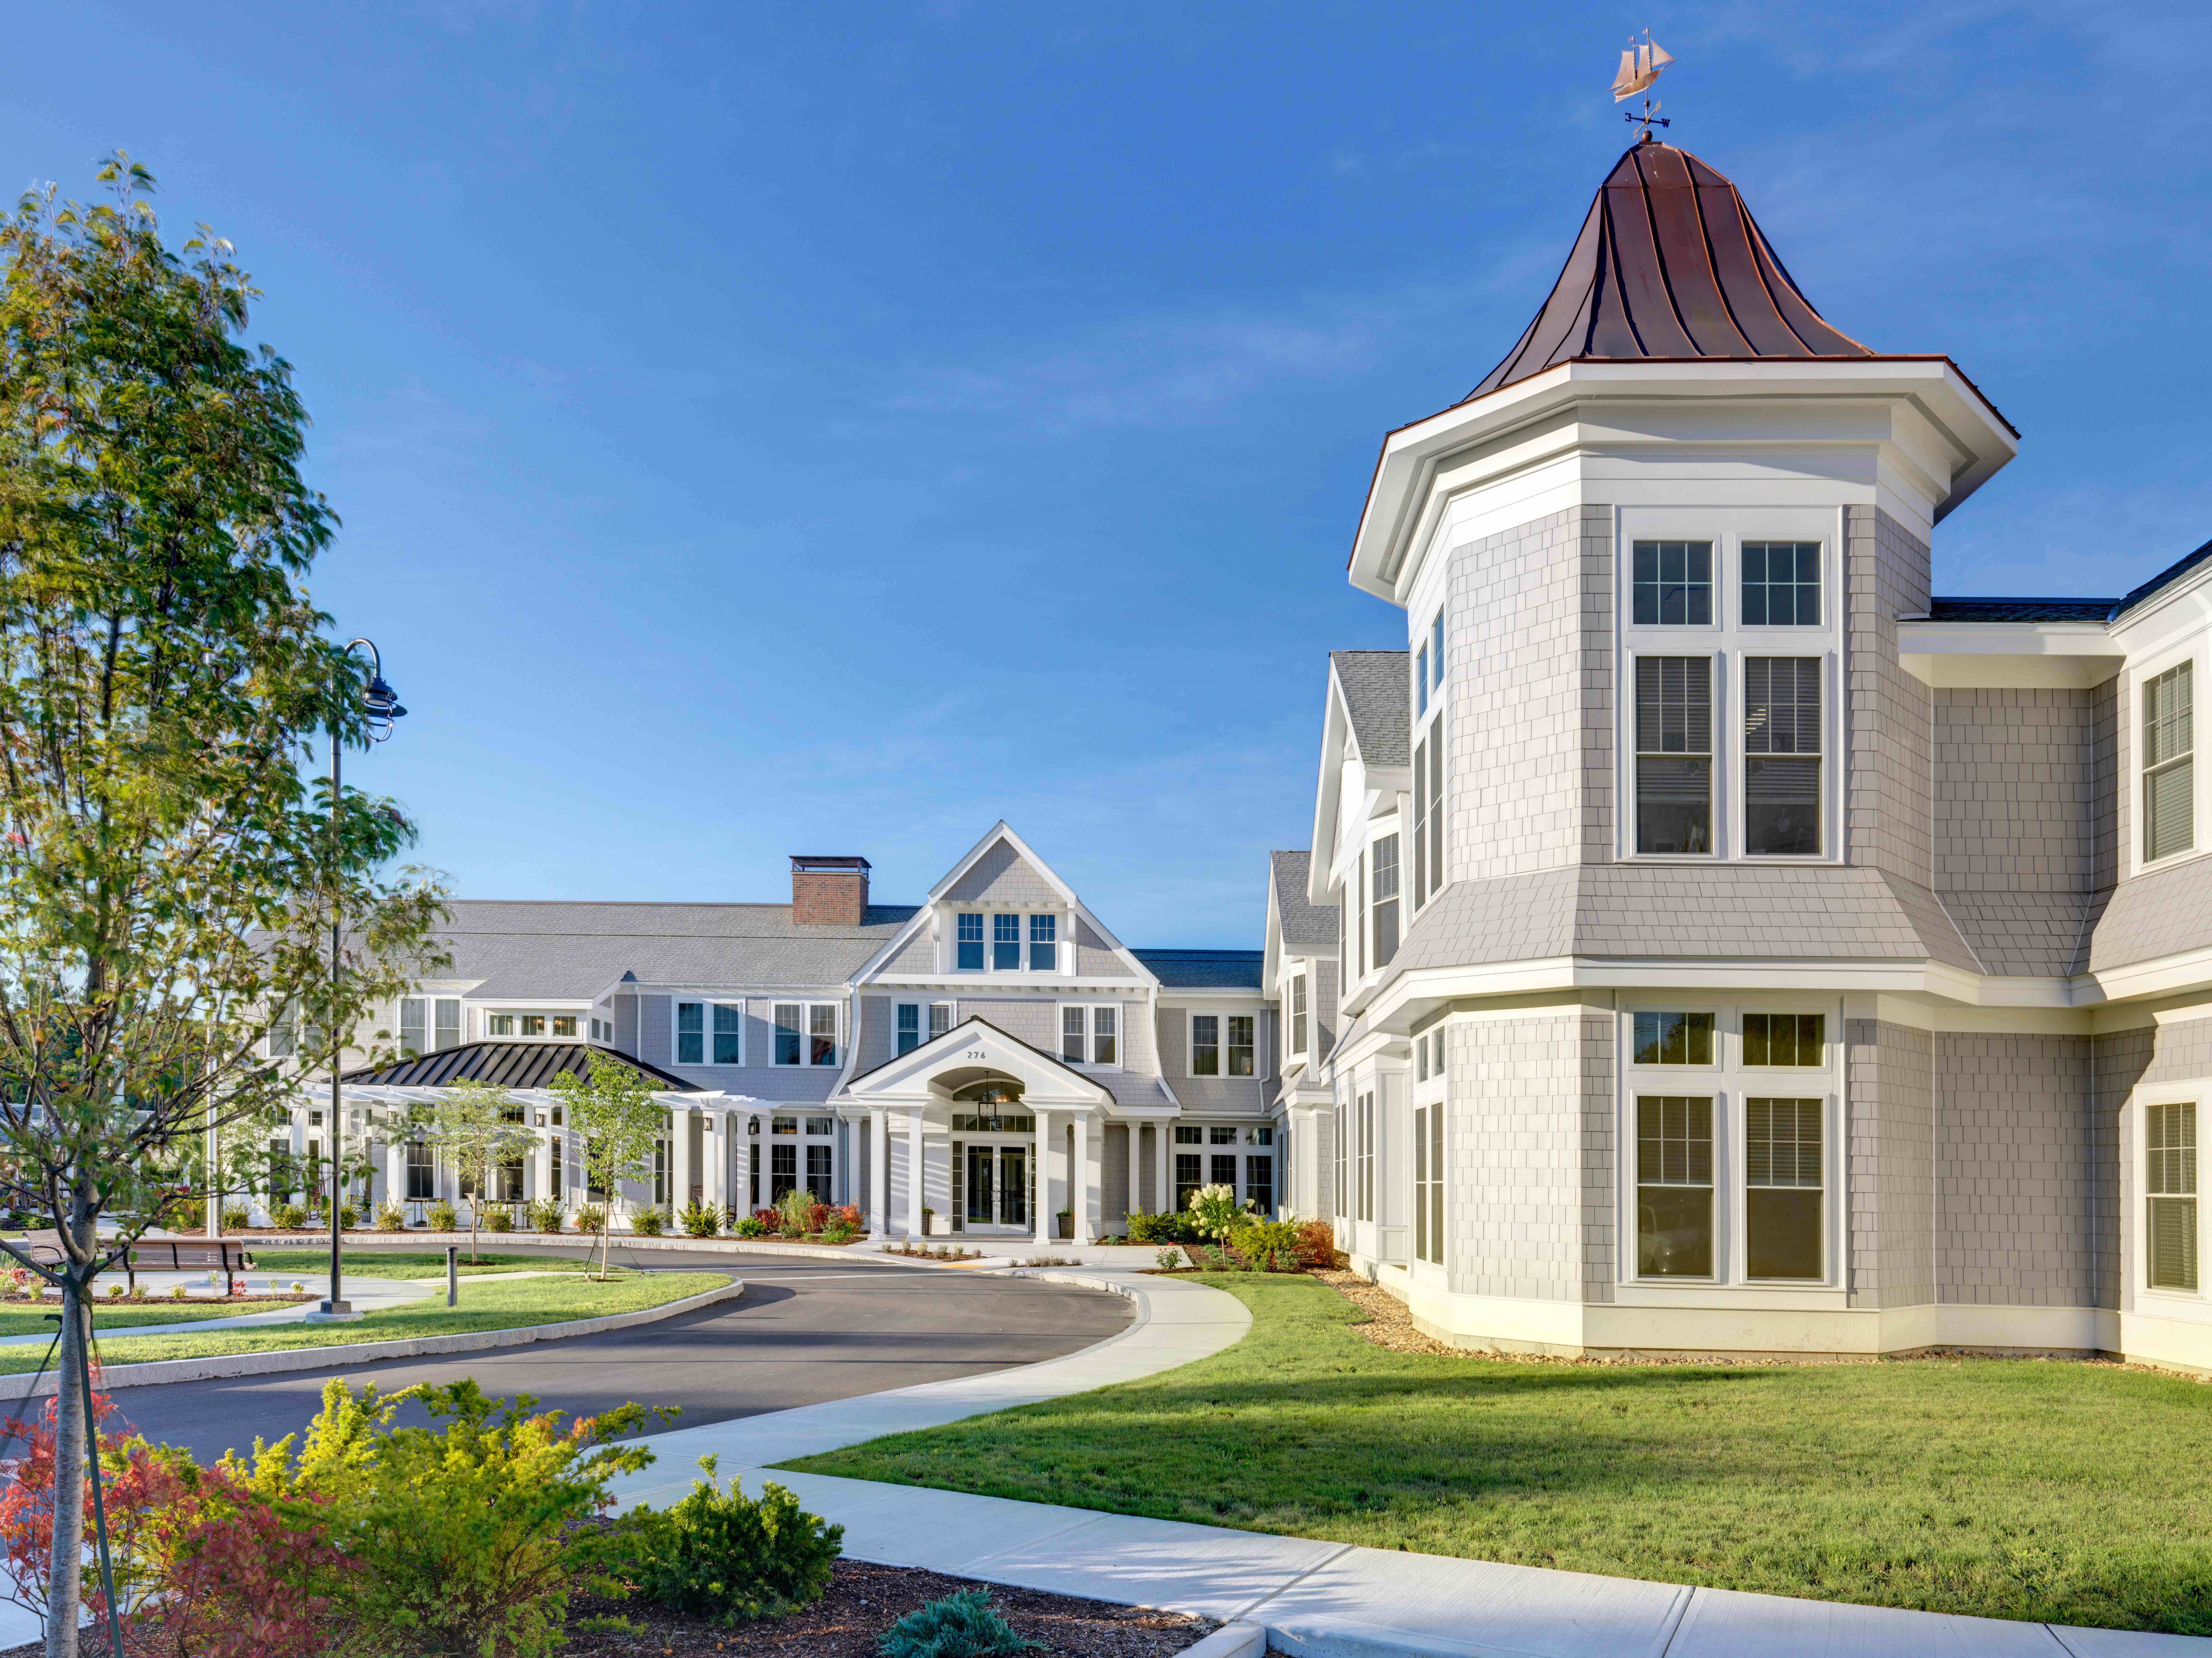 The firm is also known for market-leading senior and assisted living communities (Photo credit: Andy Ryan)